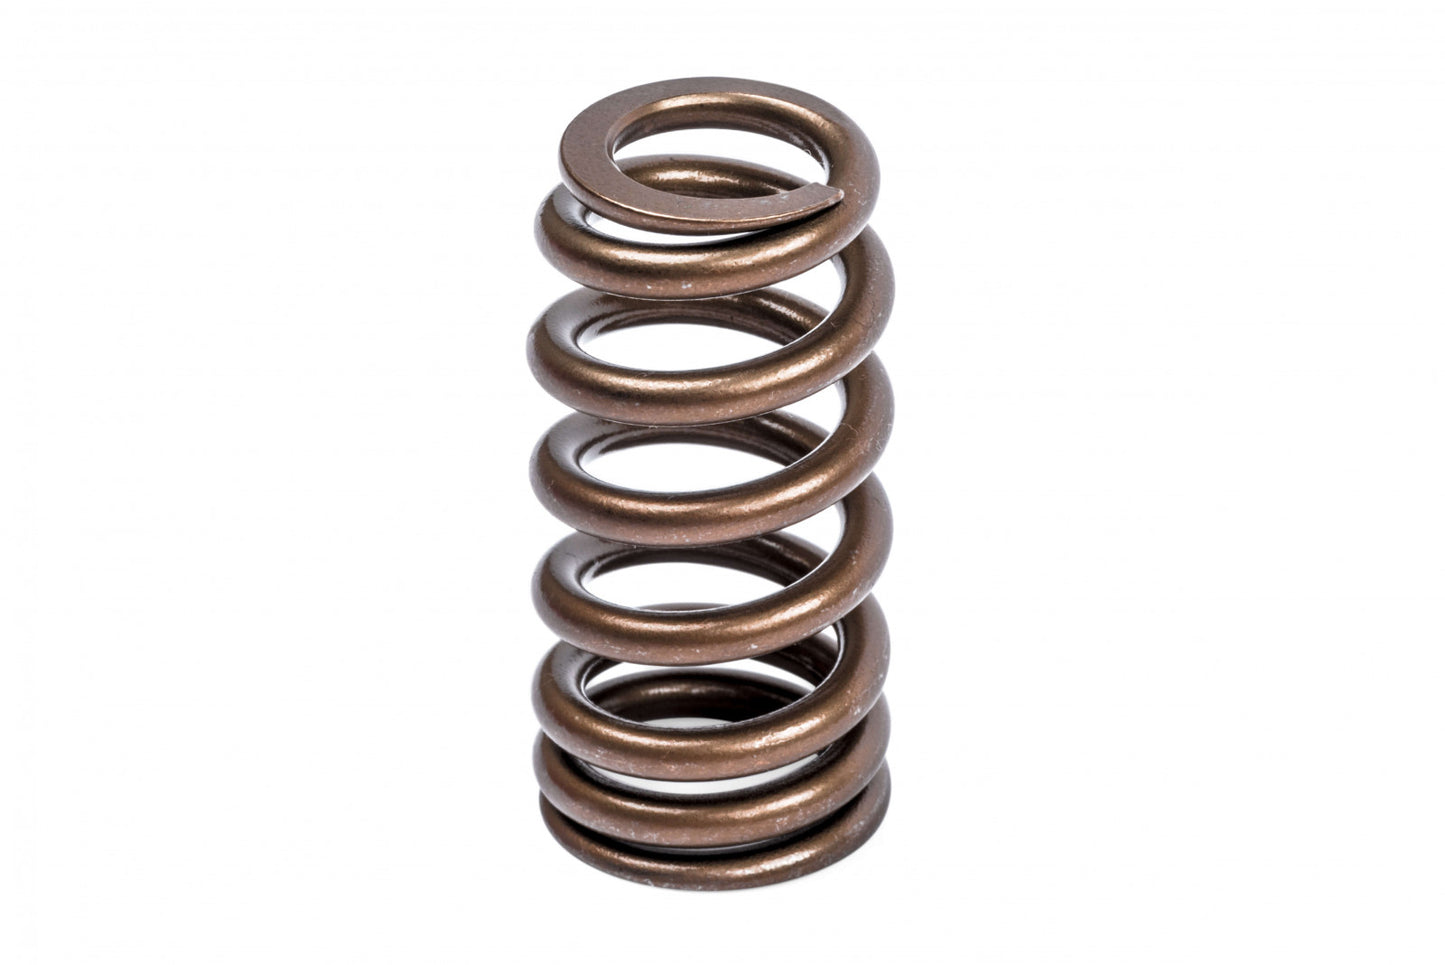 APR Valve Springs/Seats/Retainers - Set of 20 MS100089